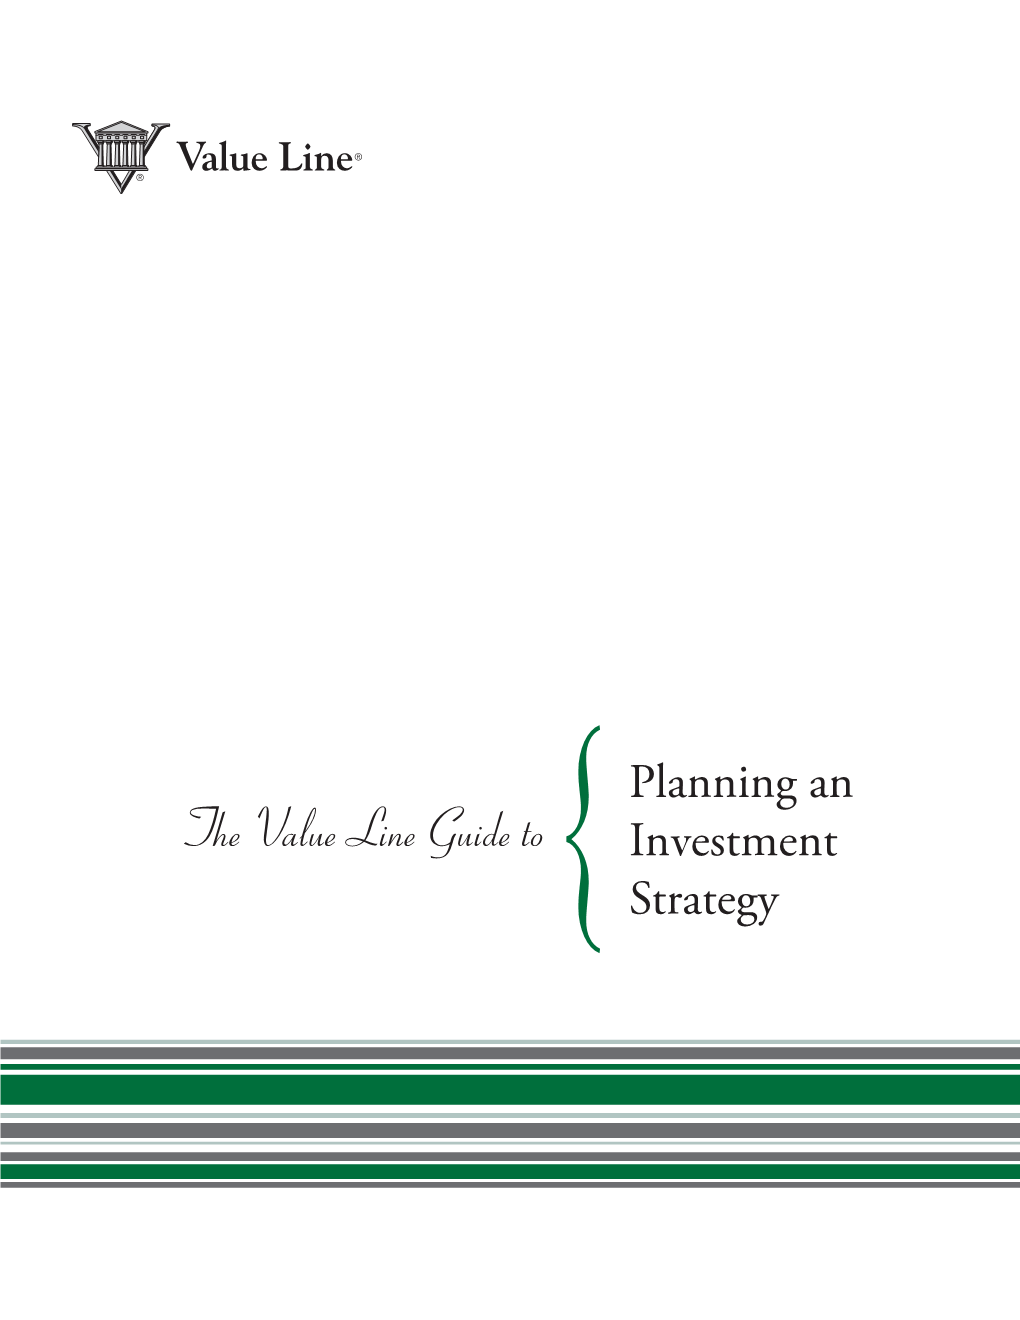 Value Line's Guide to Planning an Investment Strategy